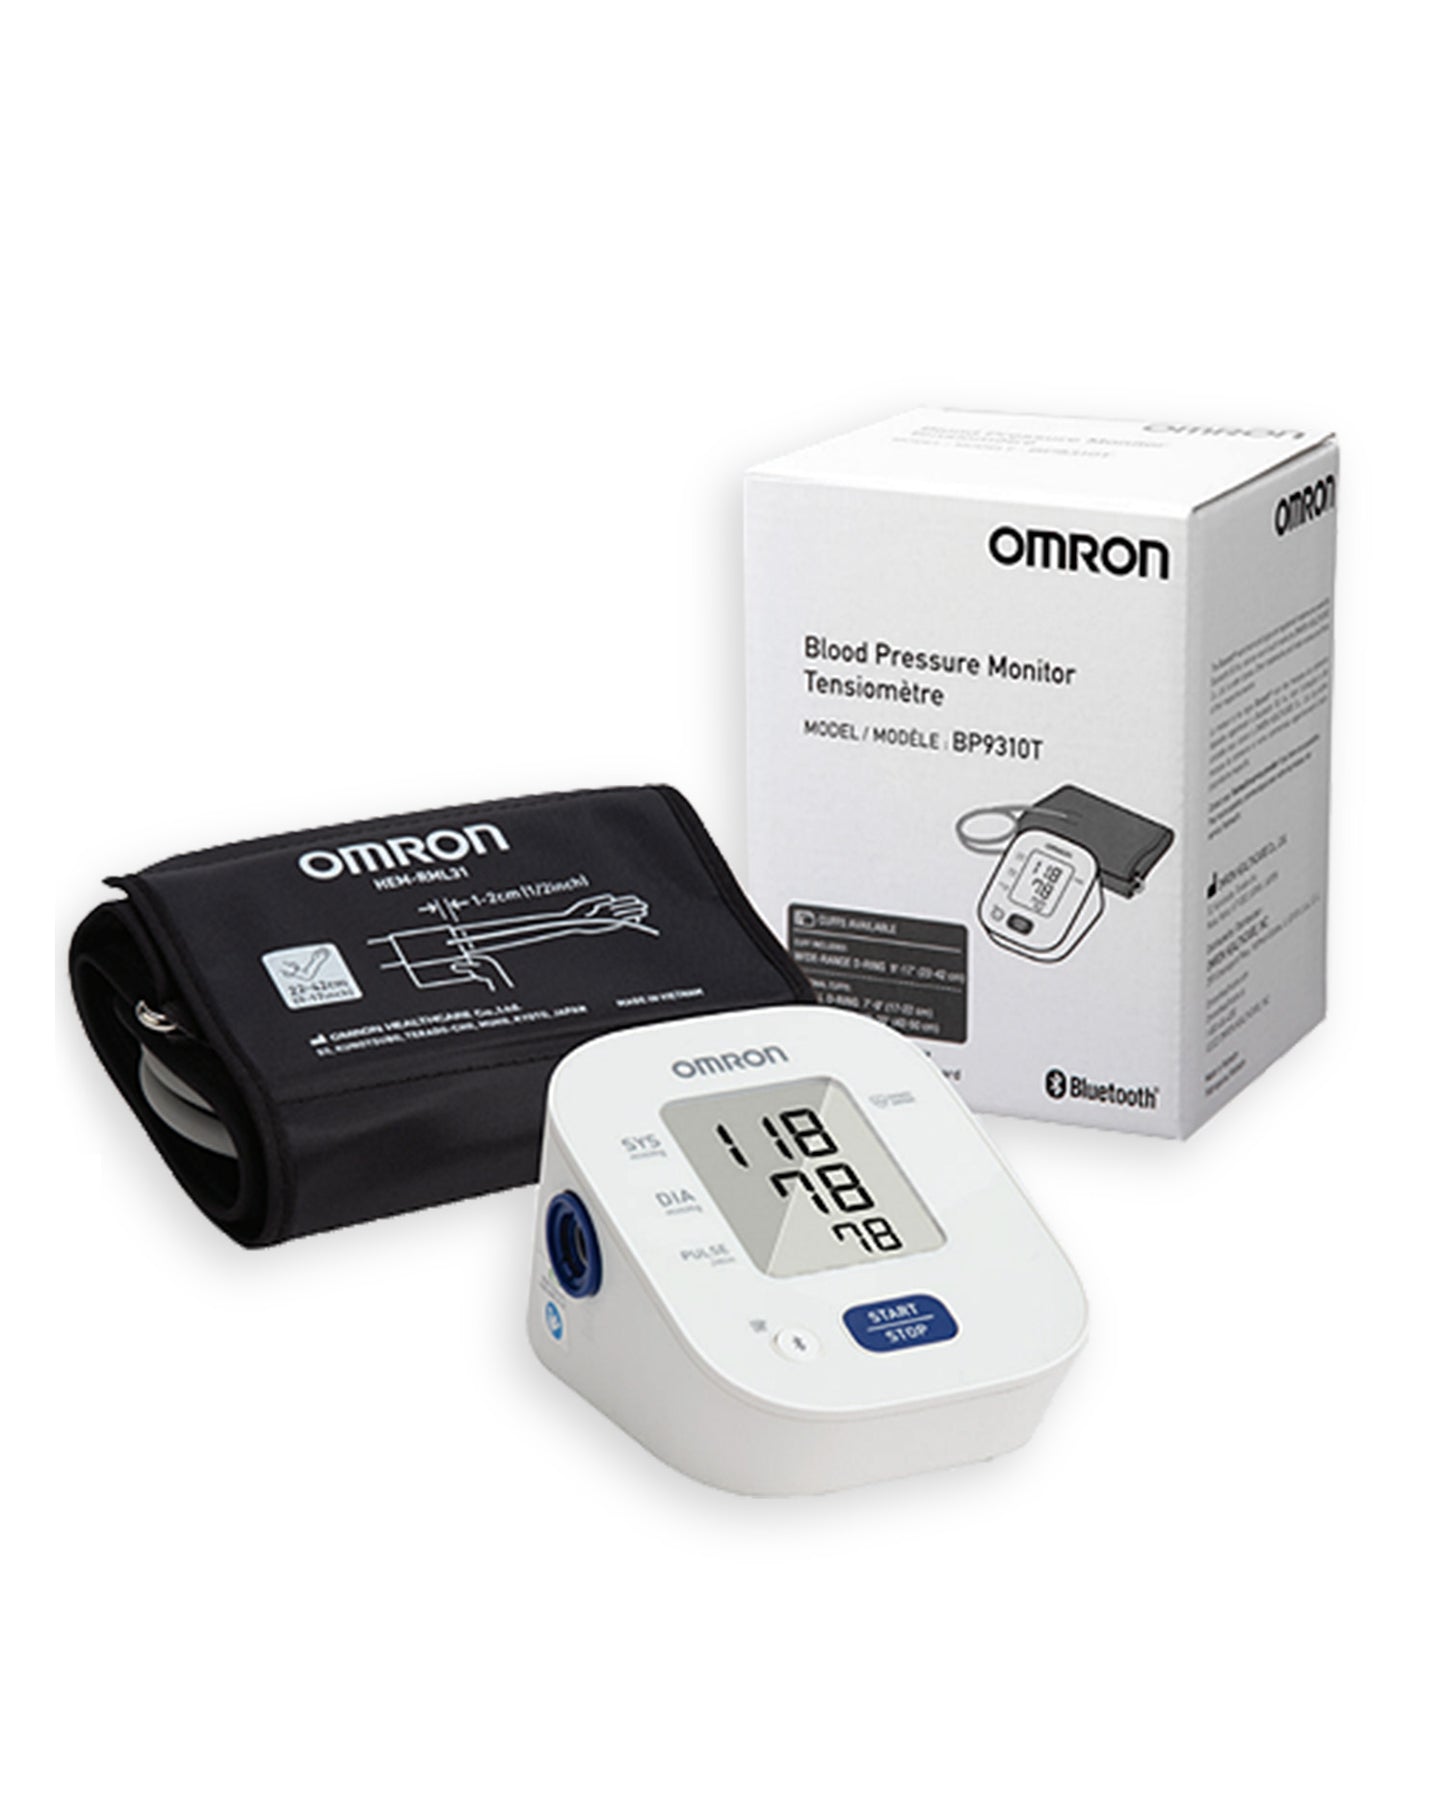 Omron Ten Series Wireless Upper Arm Blood Pressure Monitor With Bluetooth